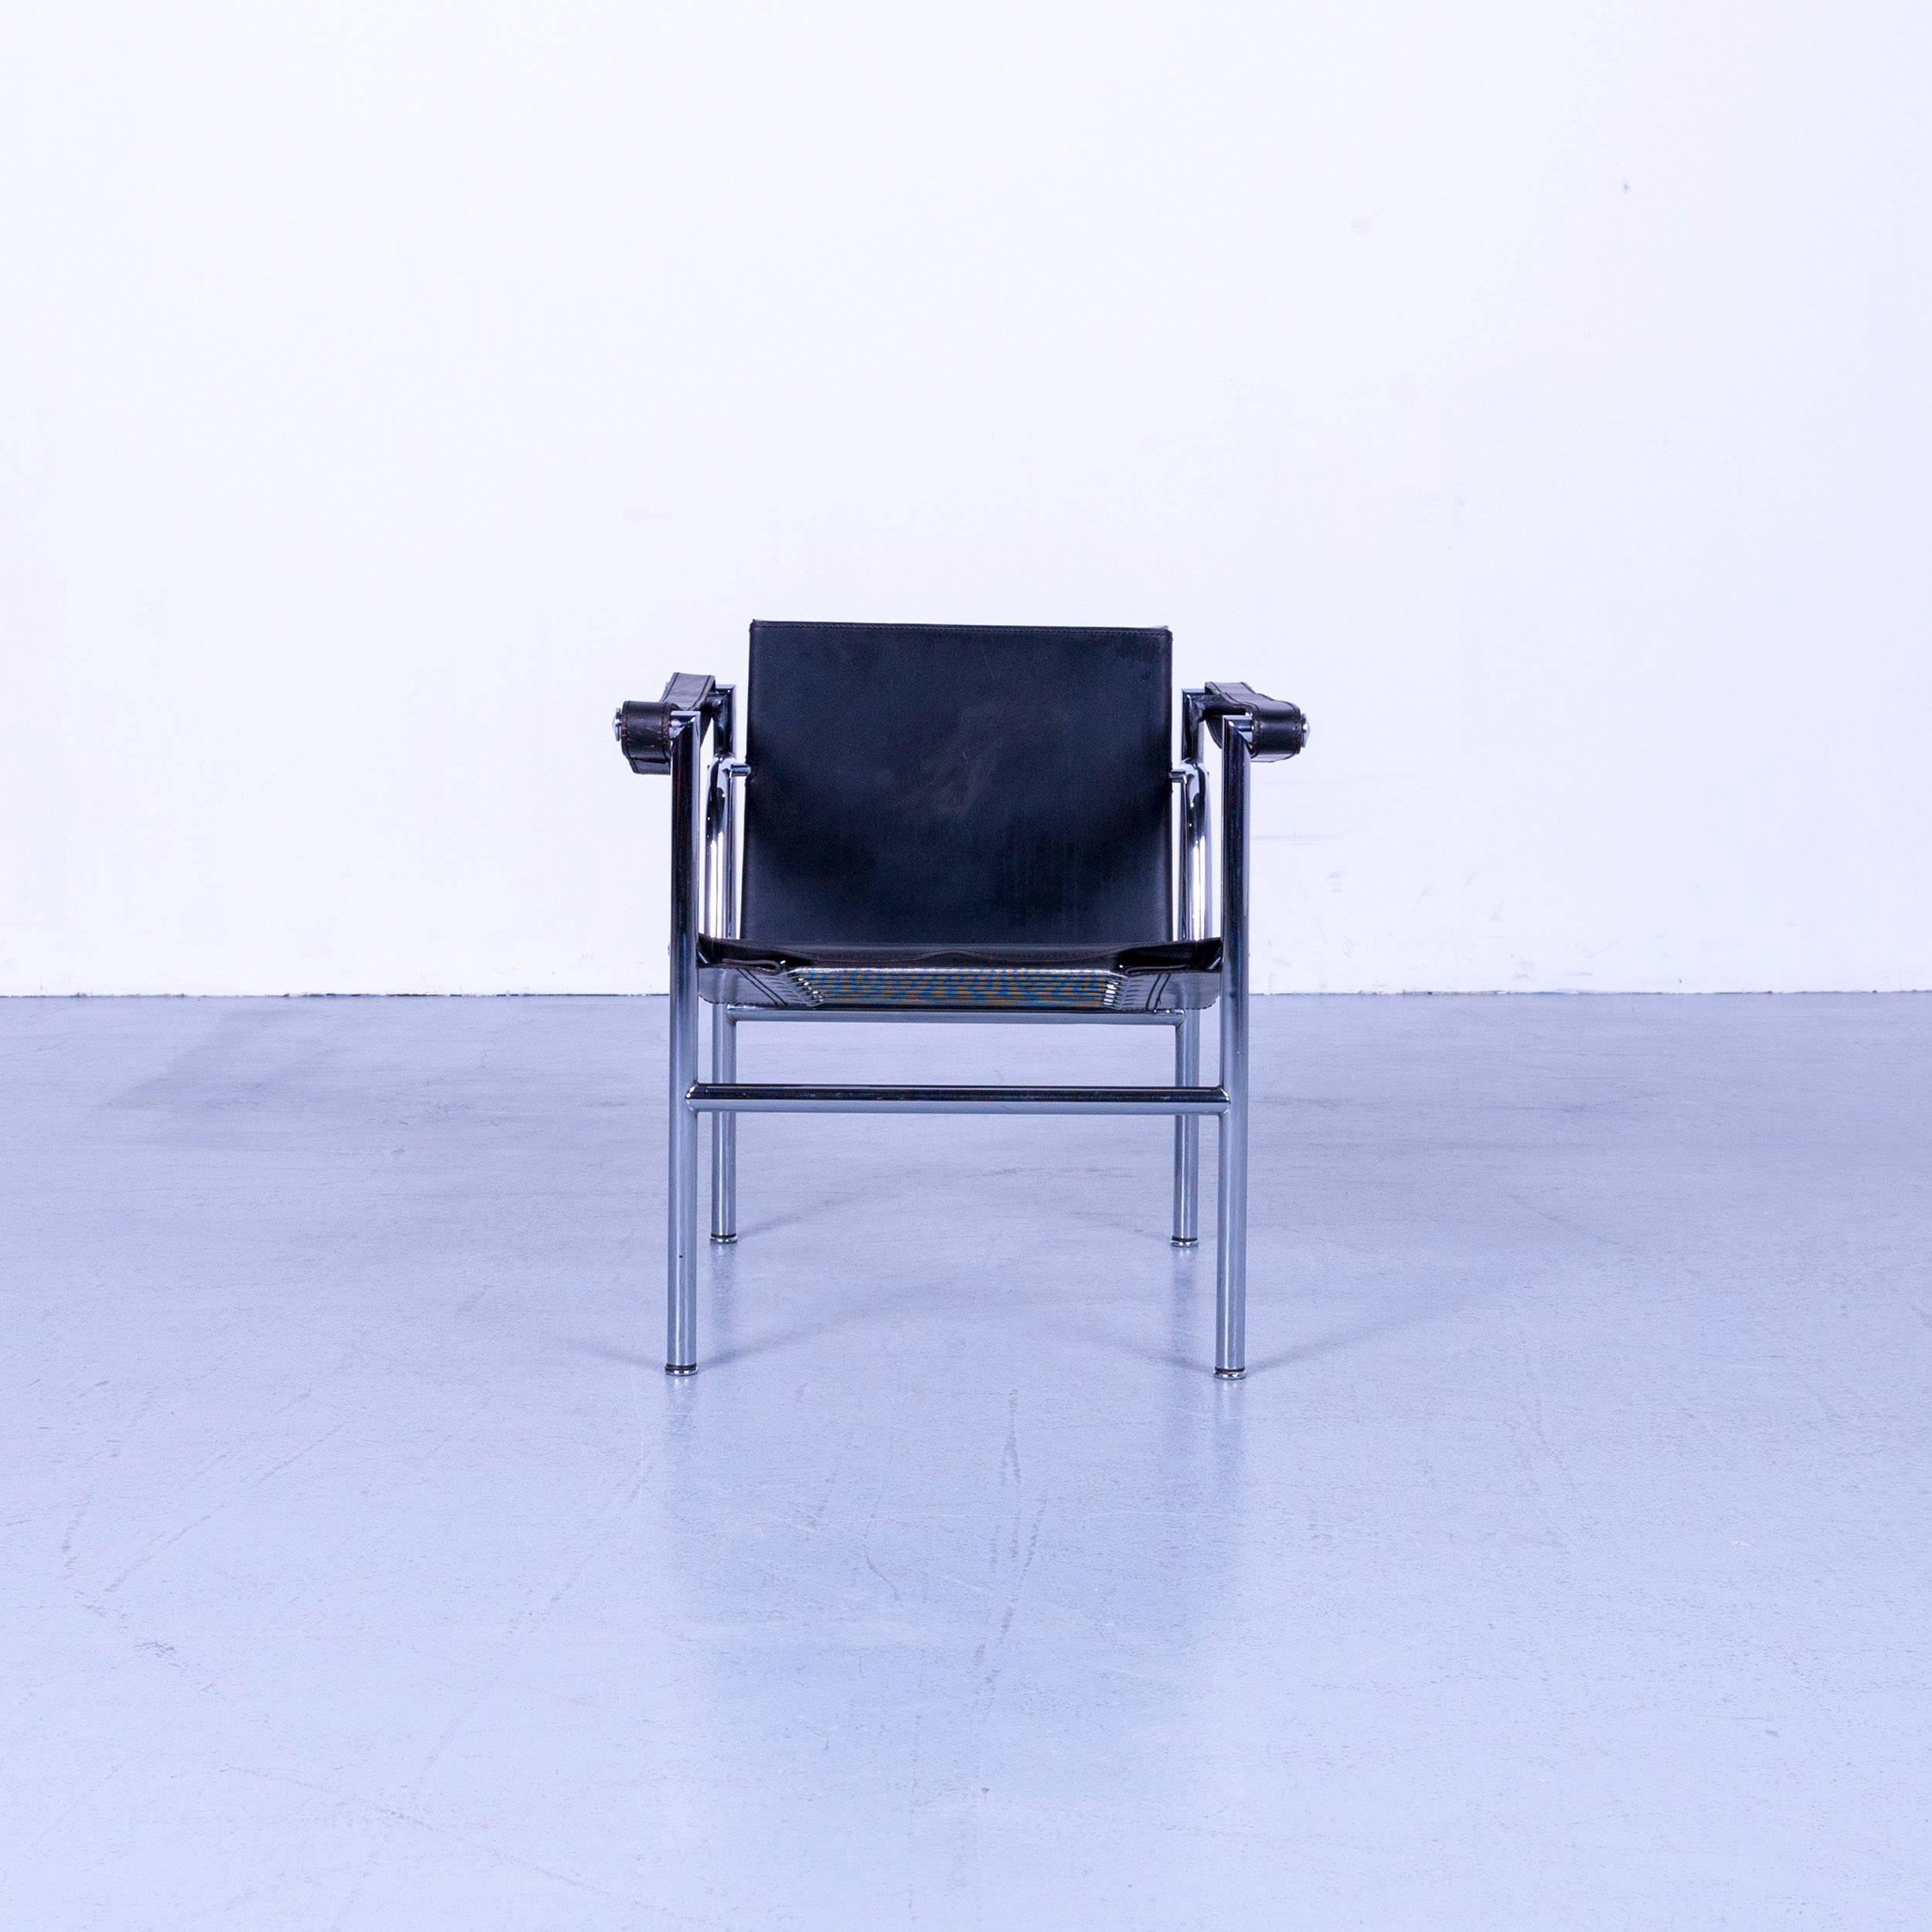 We offer delivery options to most destinations on earth. Find our shipping quotes at the bottom of this page in the shipping section.

An Cassina Le Corbusier LC 1 Sling Chair Black Leather Bauhaus

Shipping:

An on point shipping process is our